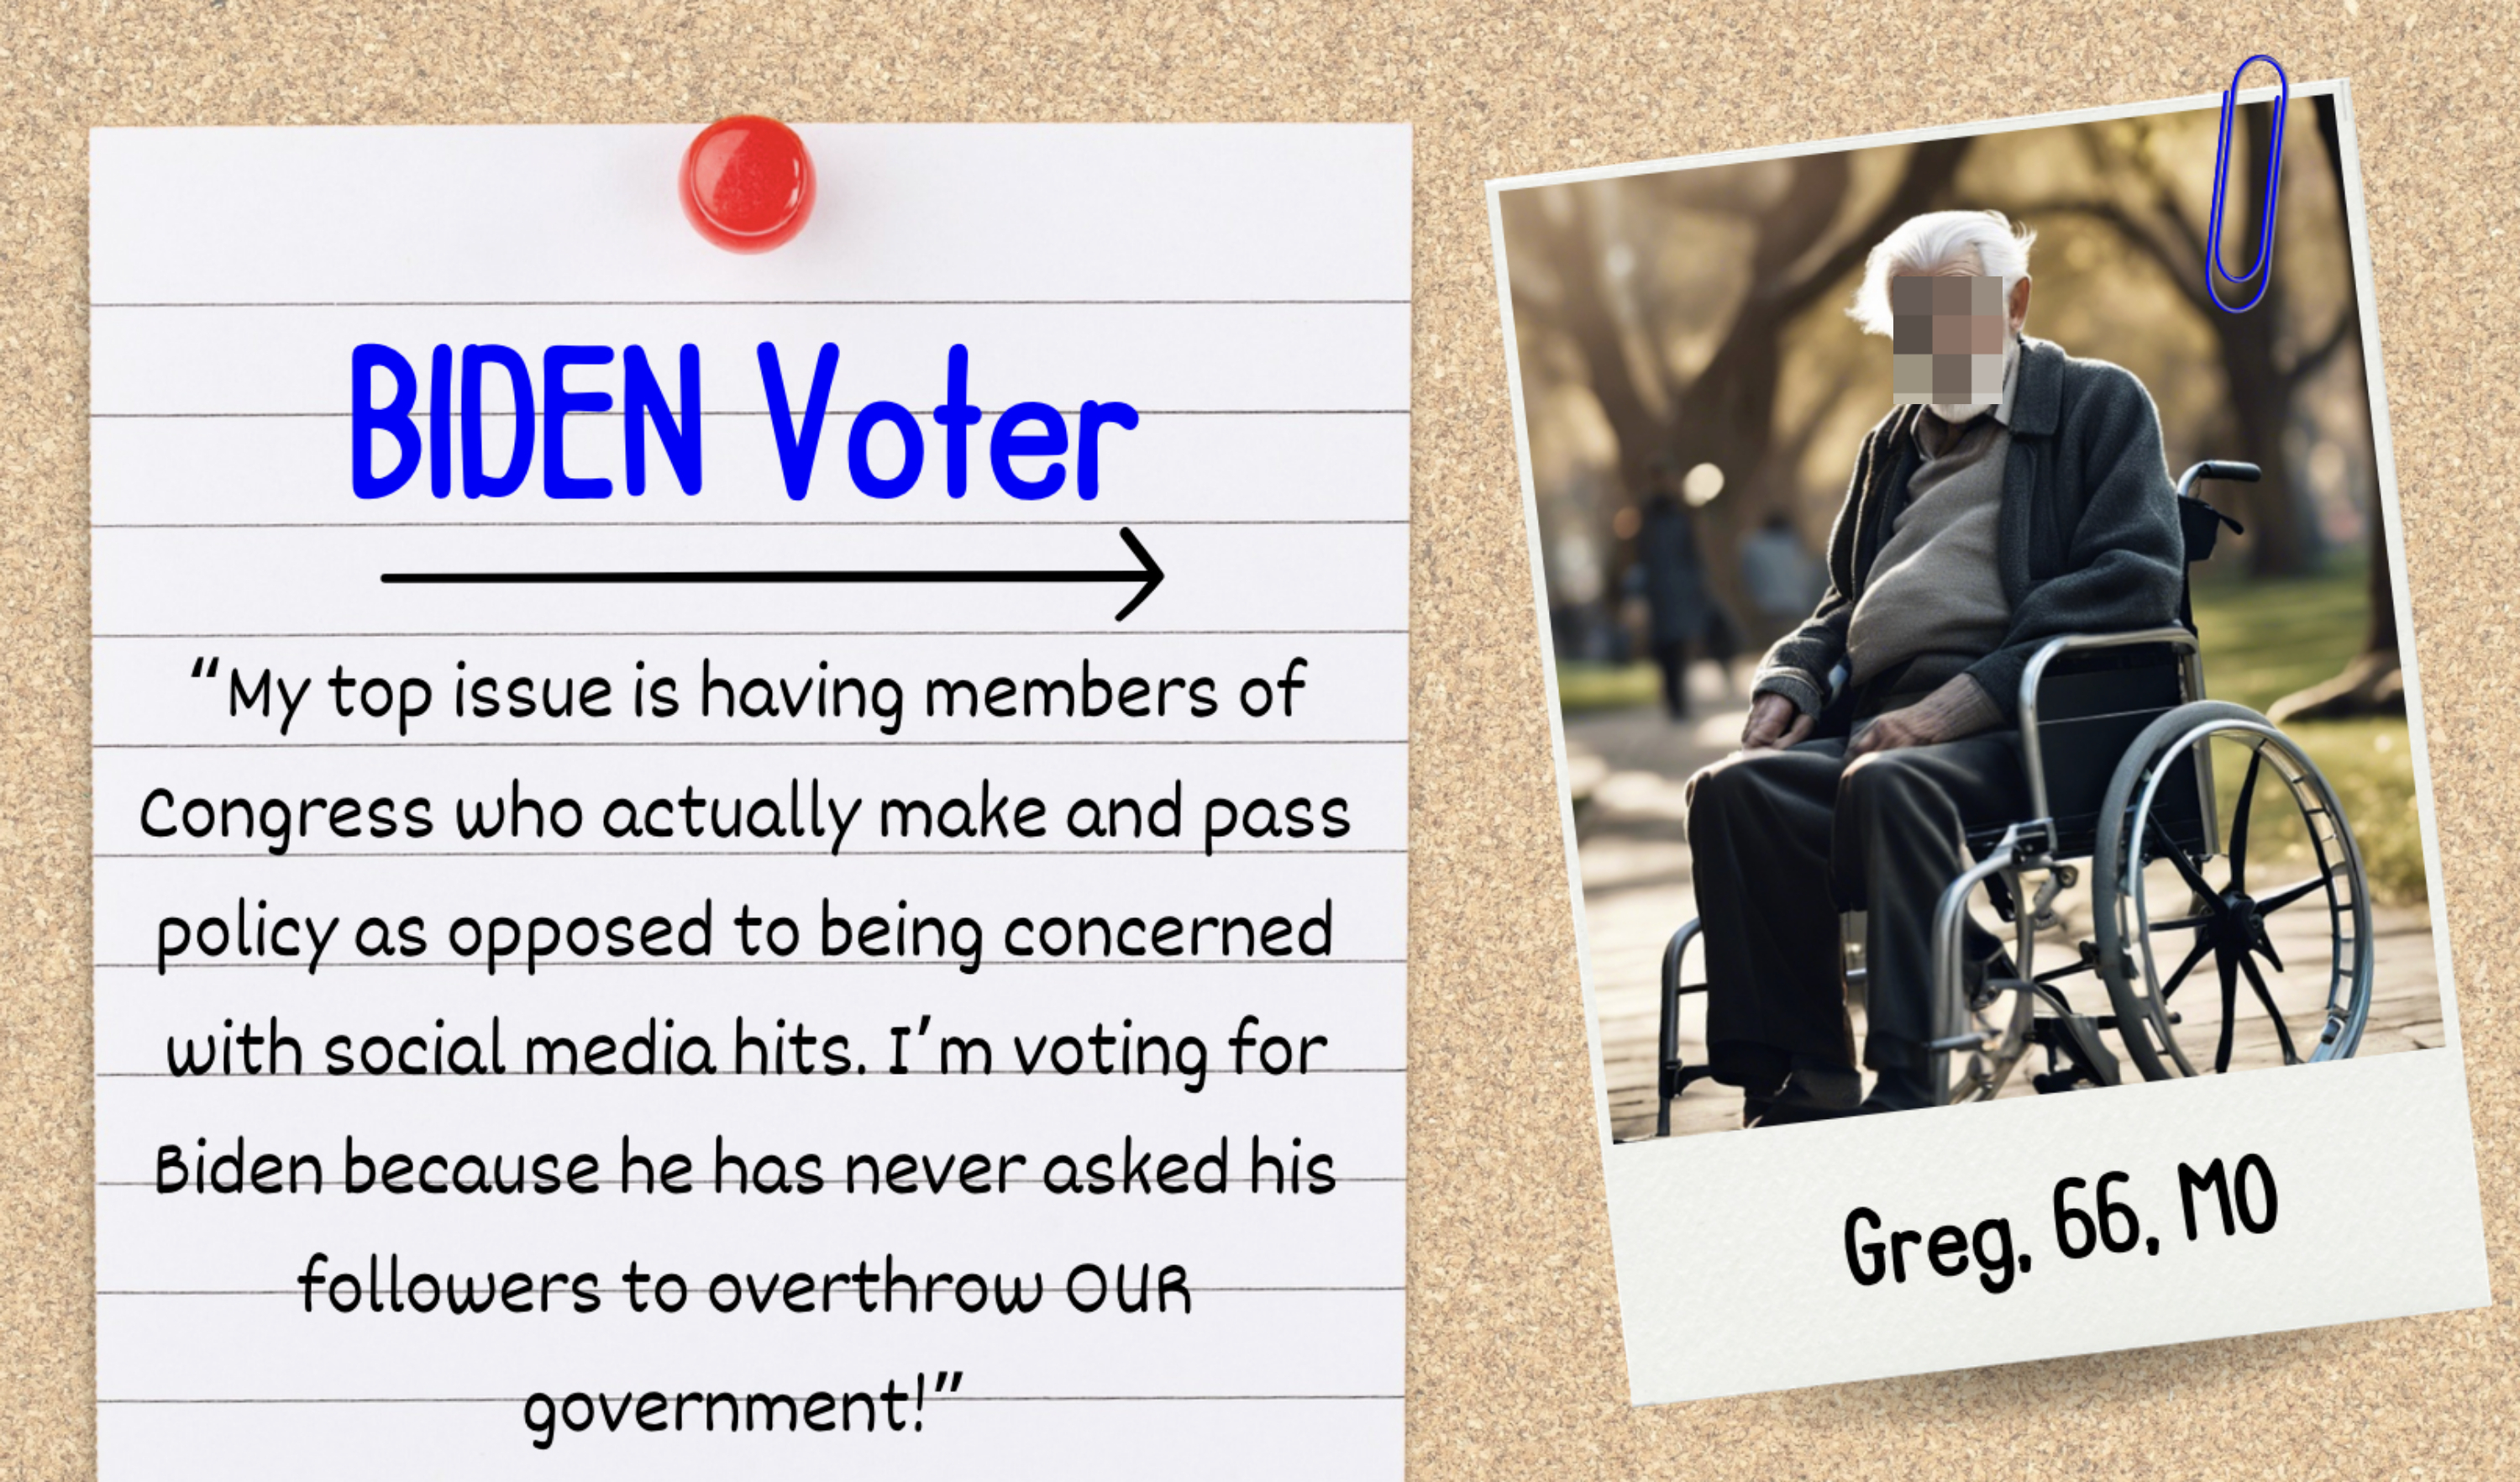 A note that says &quot;BIDEN Voter&quot; with a quote about political priorities, next to an older man, Greg, age 66 from MO, in a wheelchair